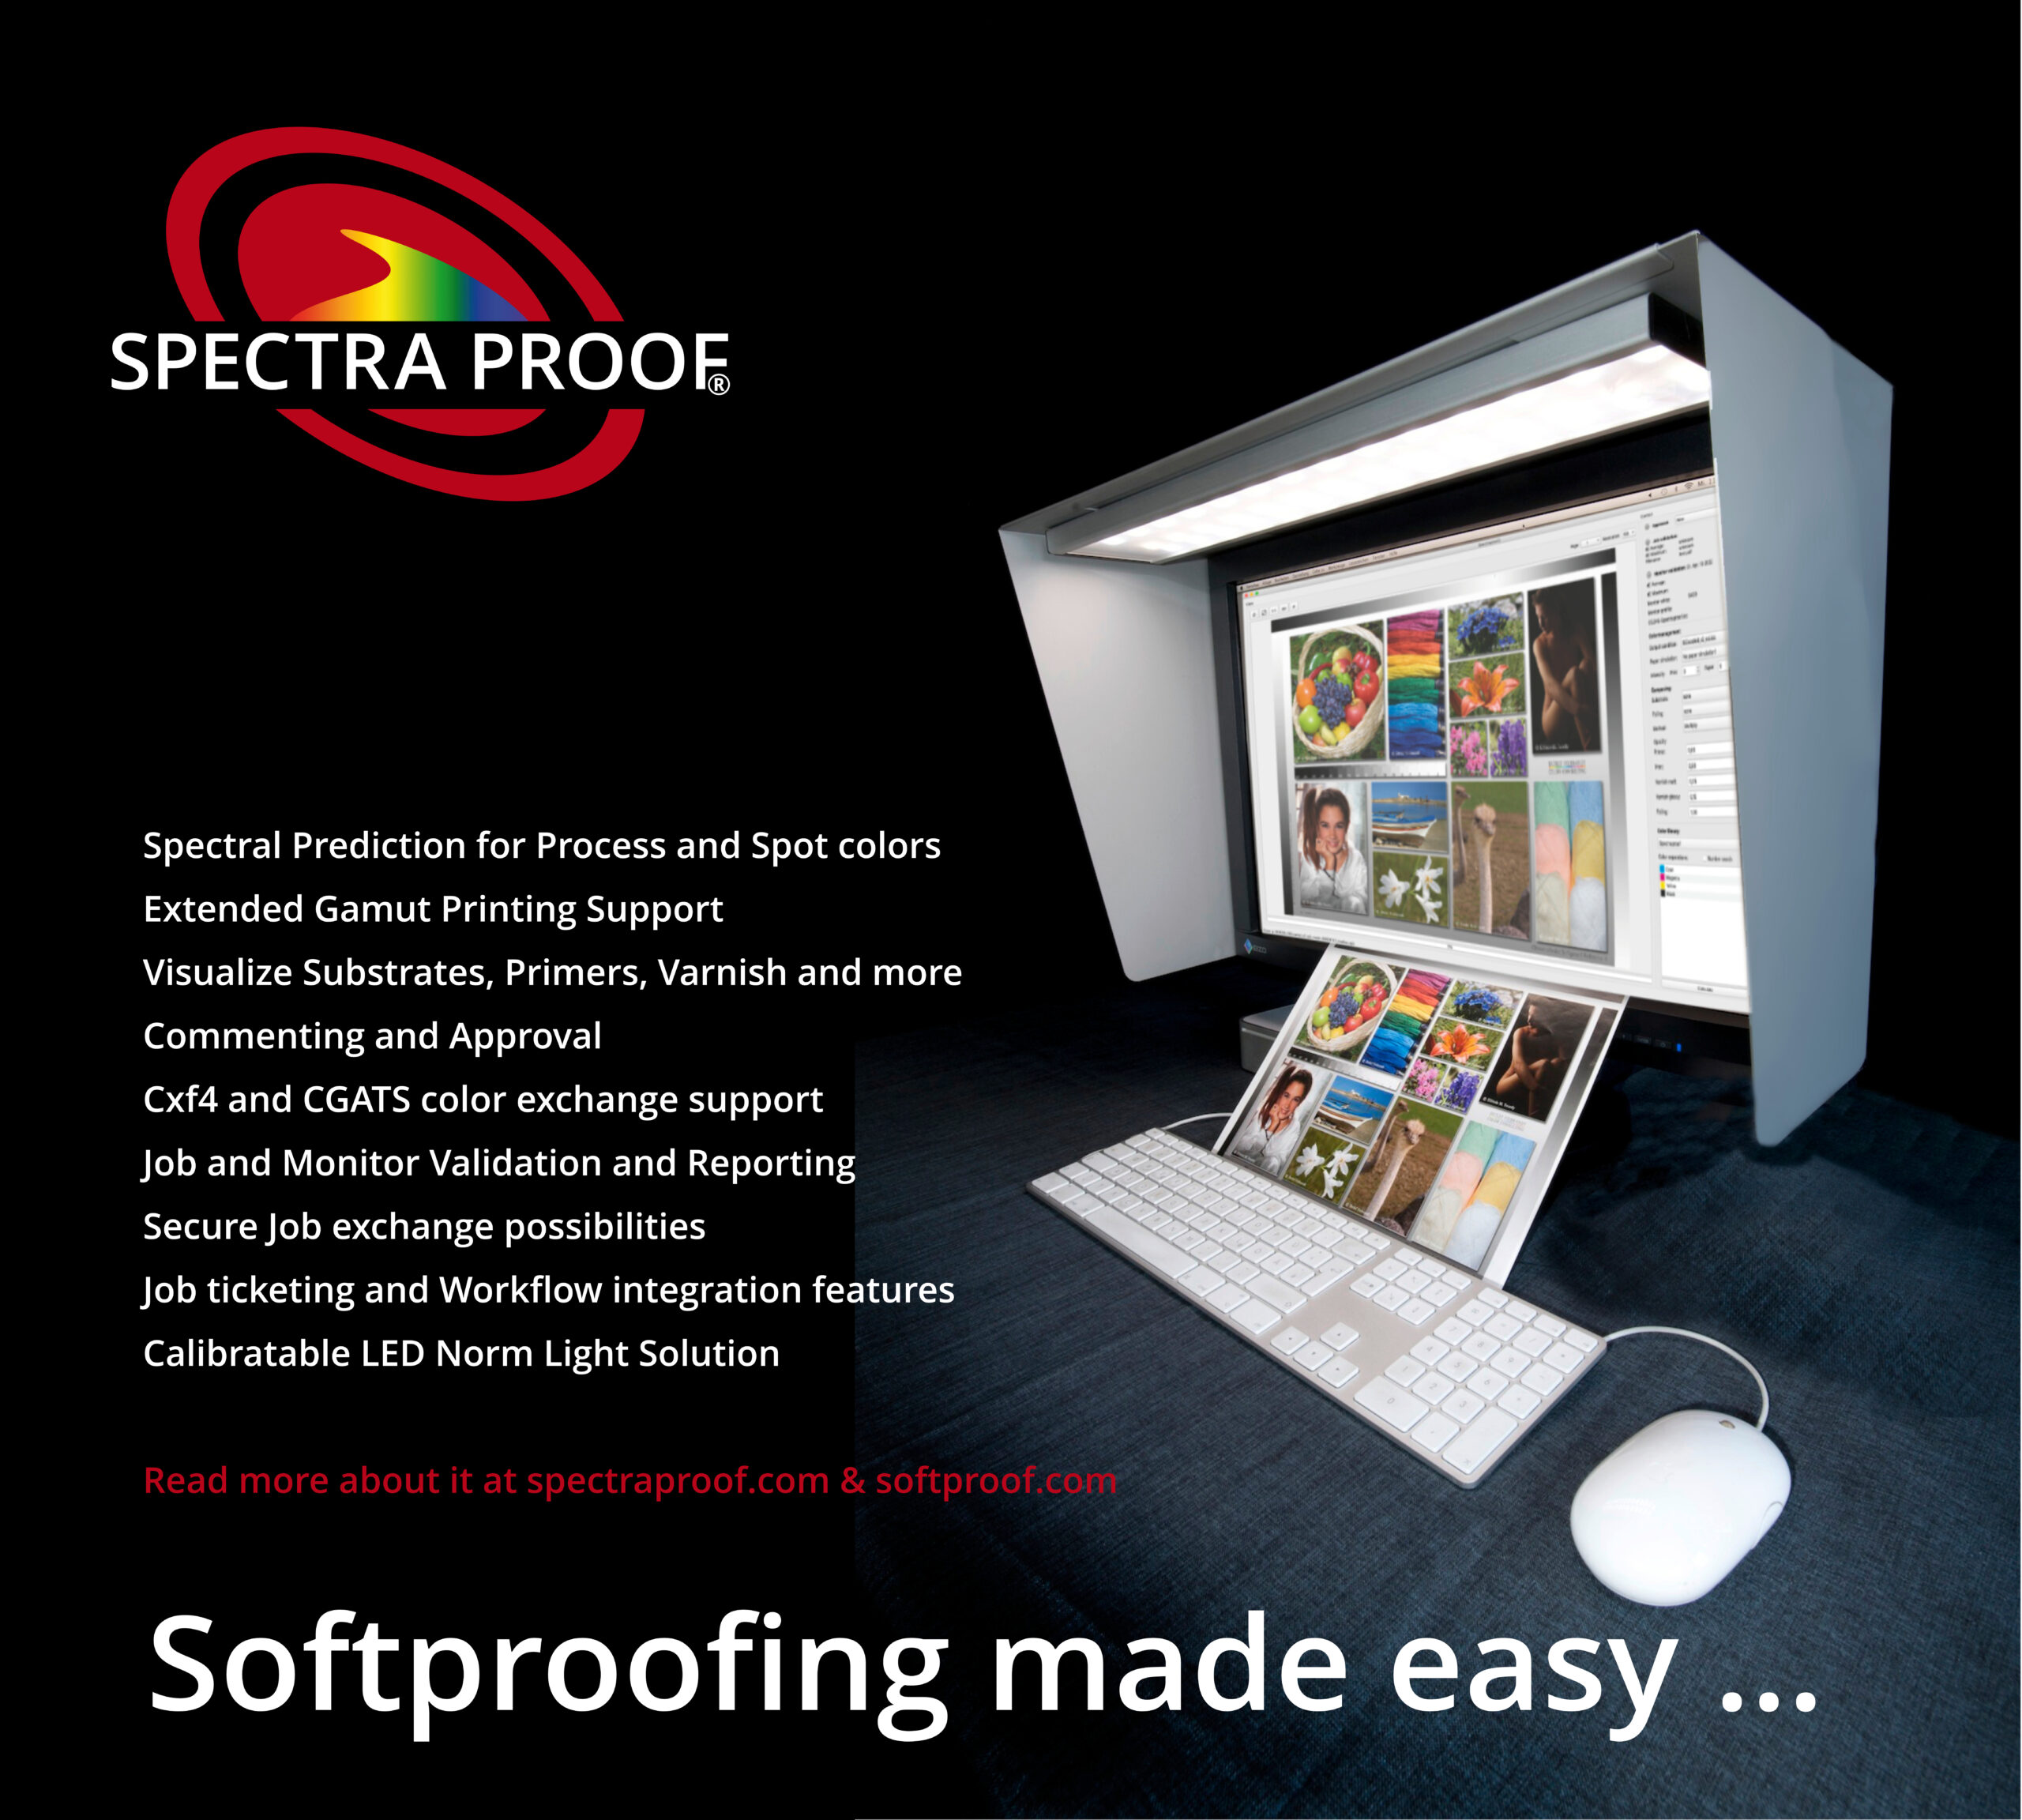 Spectraproof Softproof Solution with Spectralight, Hood, Softproof Monitor: Precise Spectral Prediction for process- and spot-colours